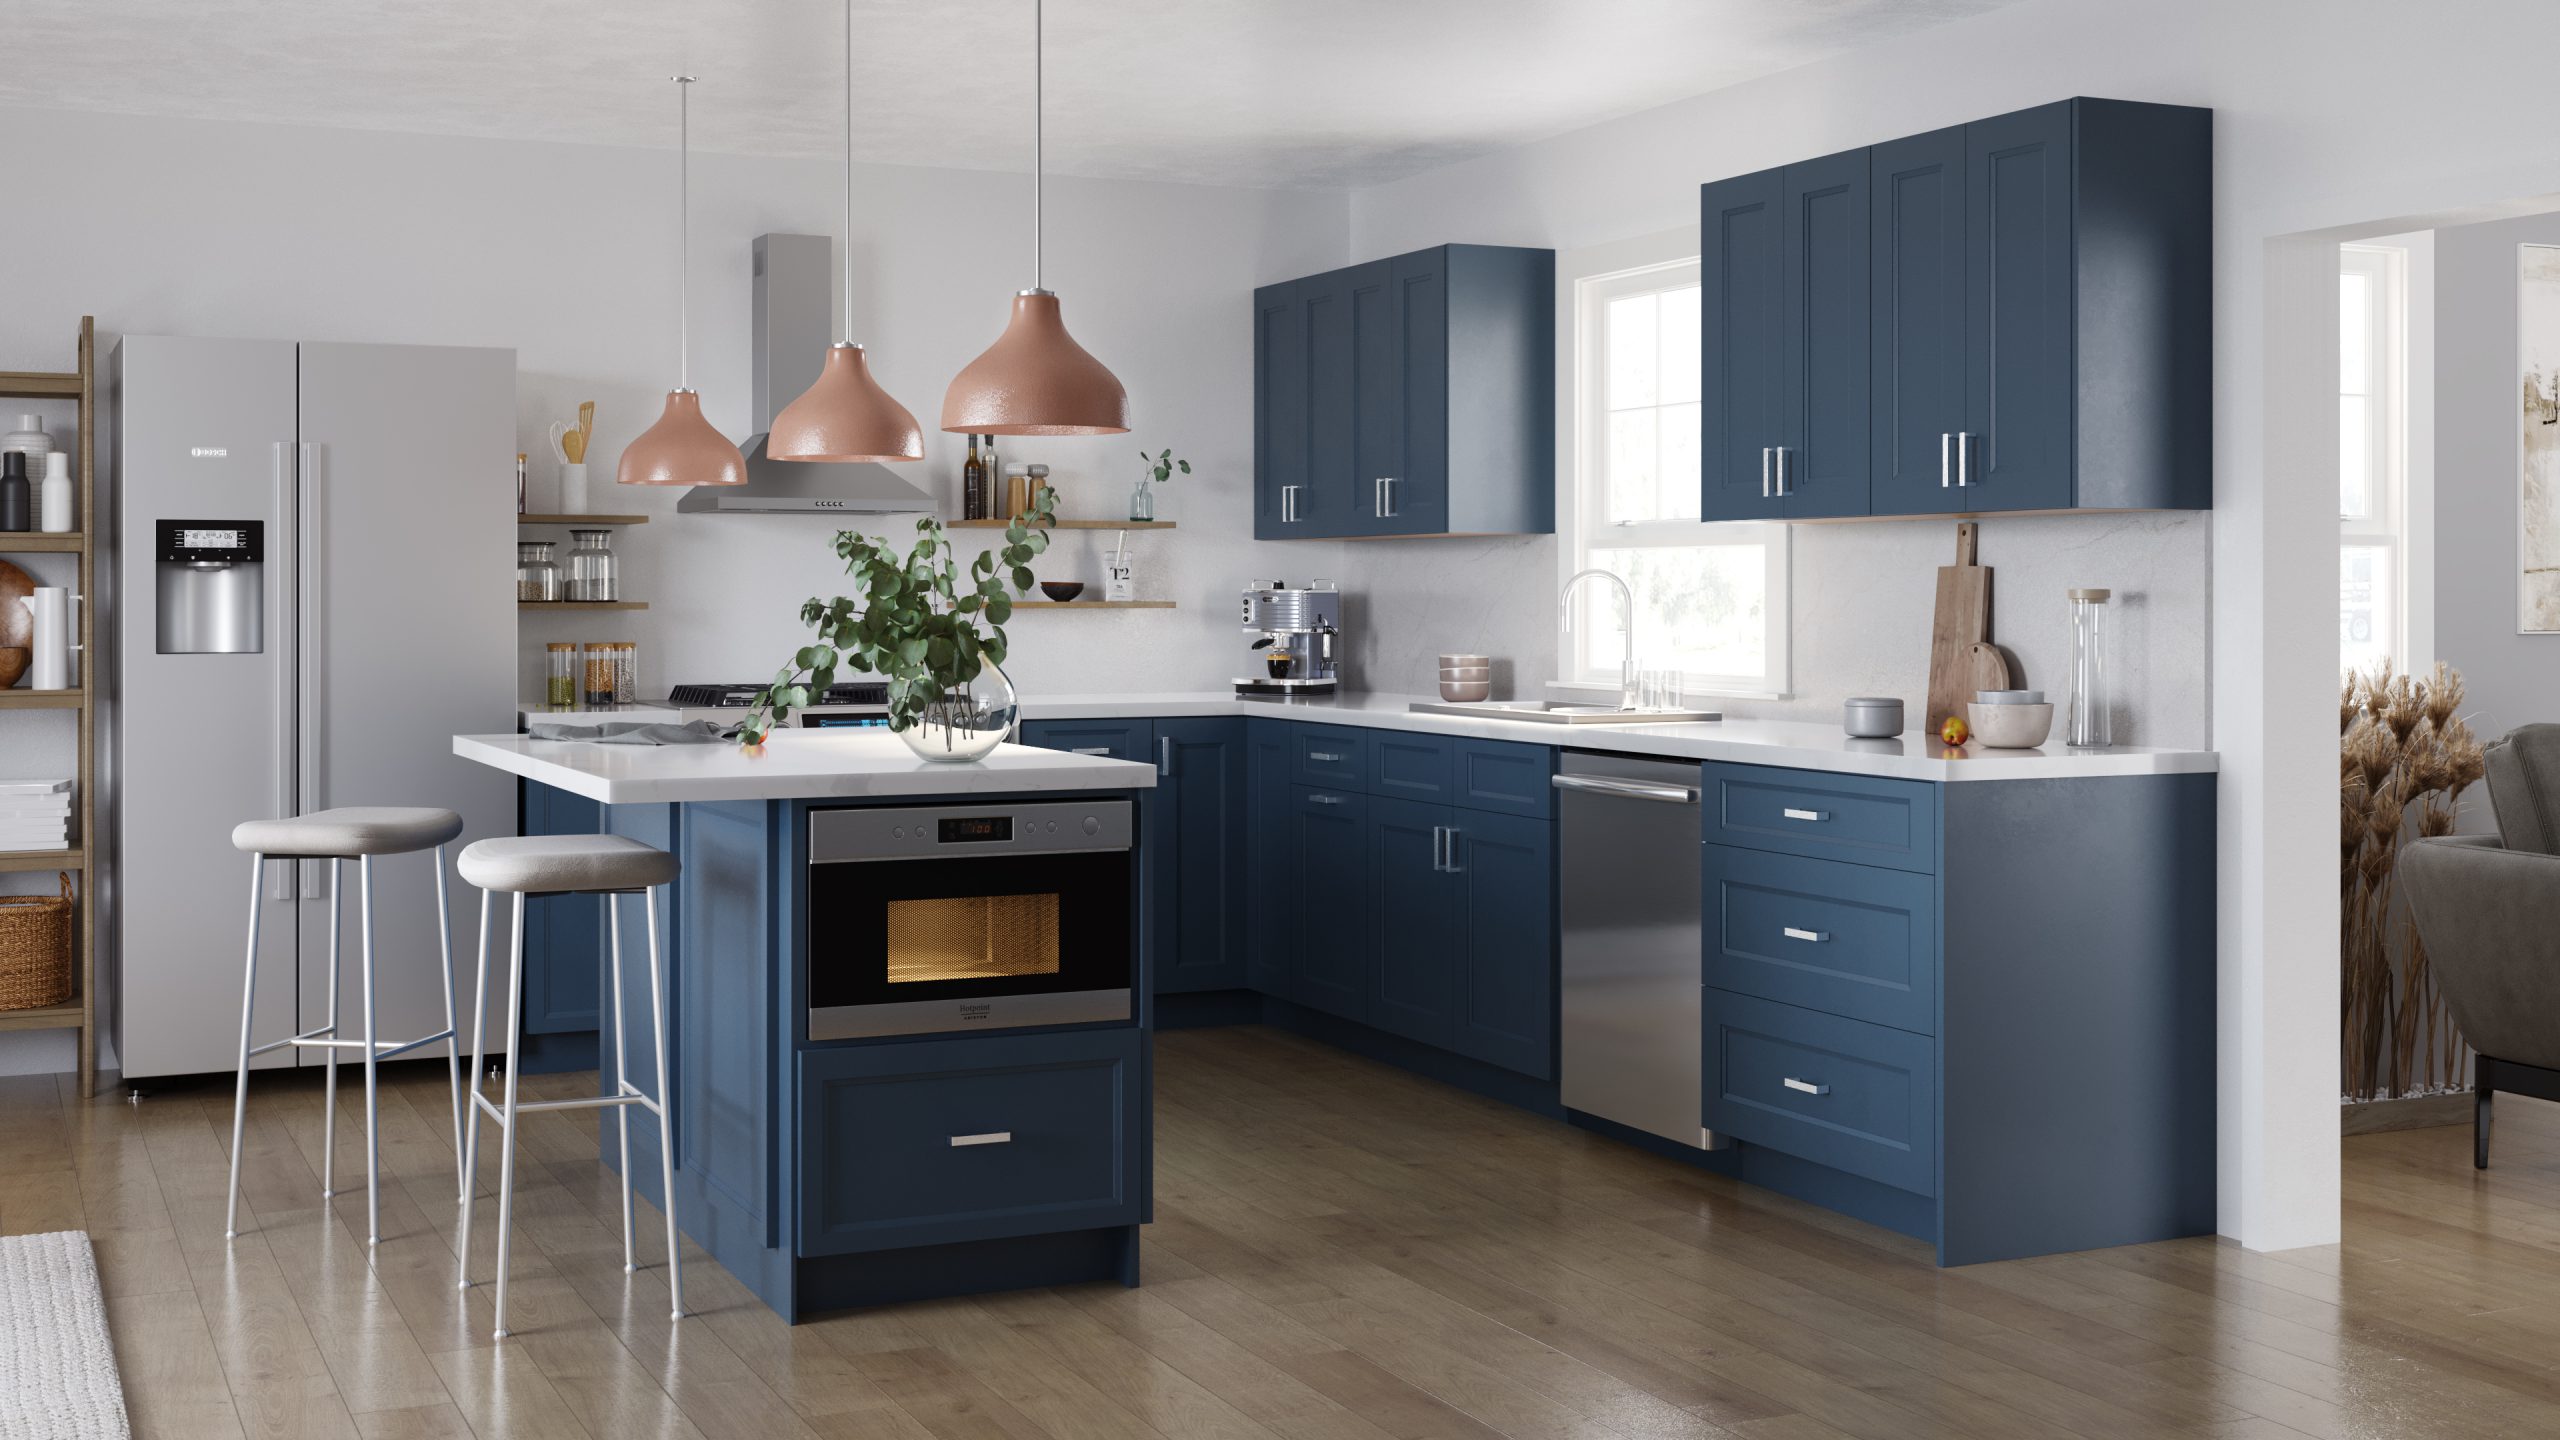 Todays Designer Kitchens Small-midnight-blue-kitchen-scaled Why Dark Kitchen Cabinets May Be a Great Choice for Your Kitchen 